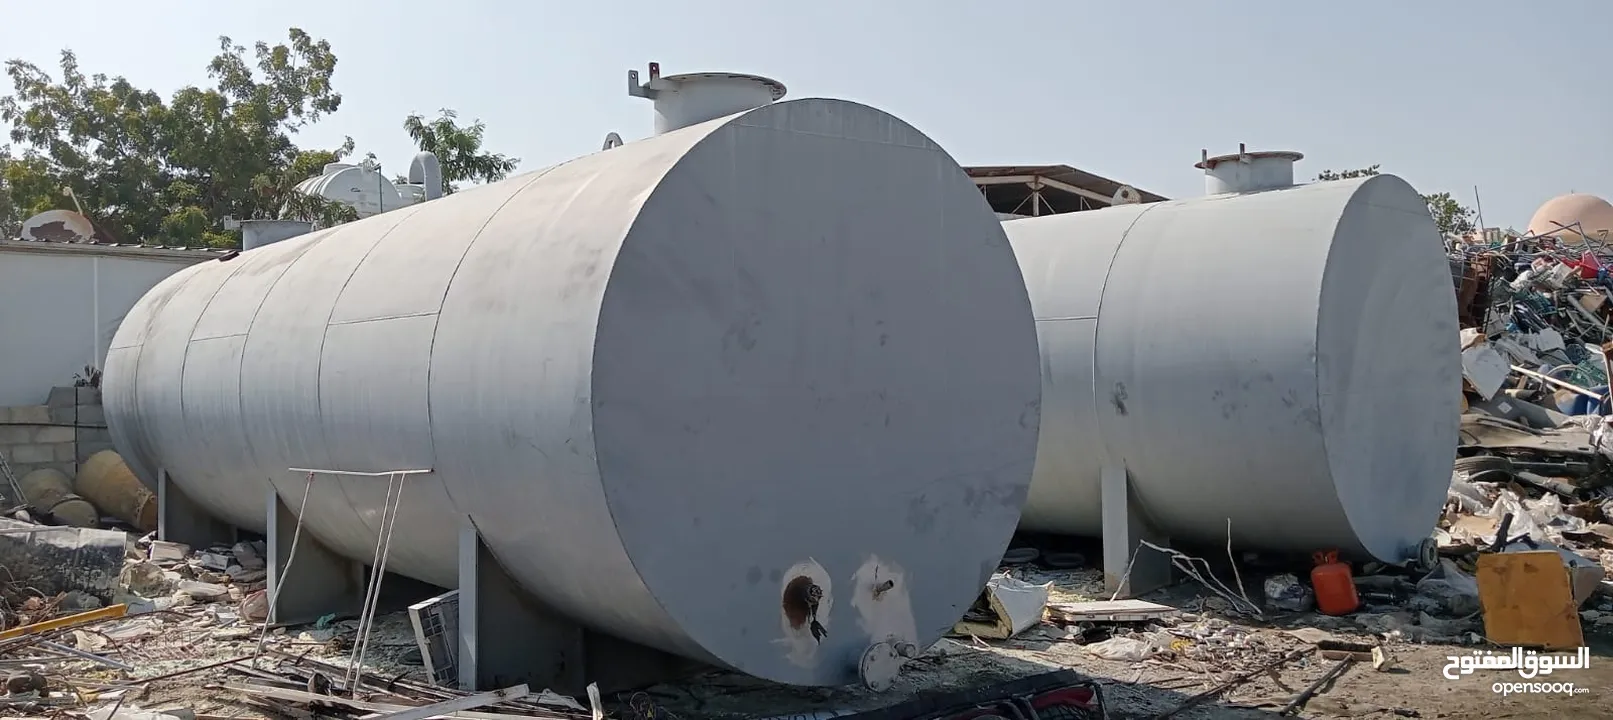 Tarcol Tanks Used 12 Mtr lenght  for Sale